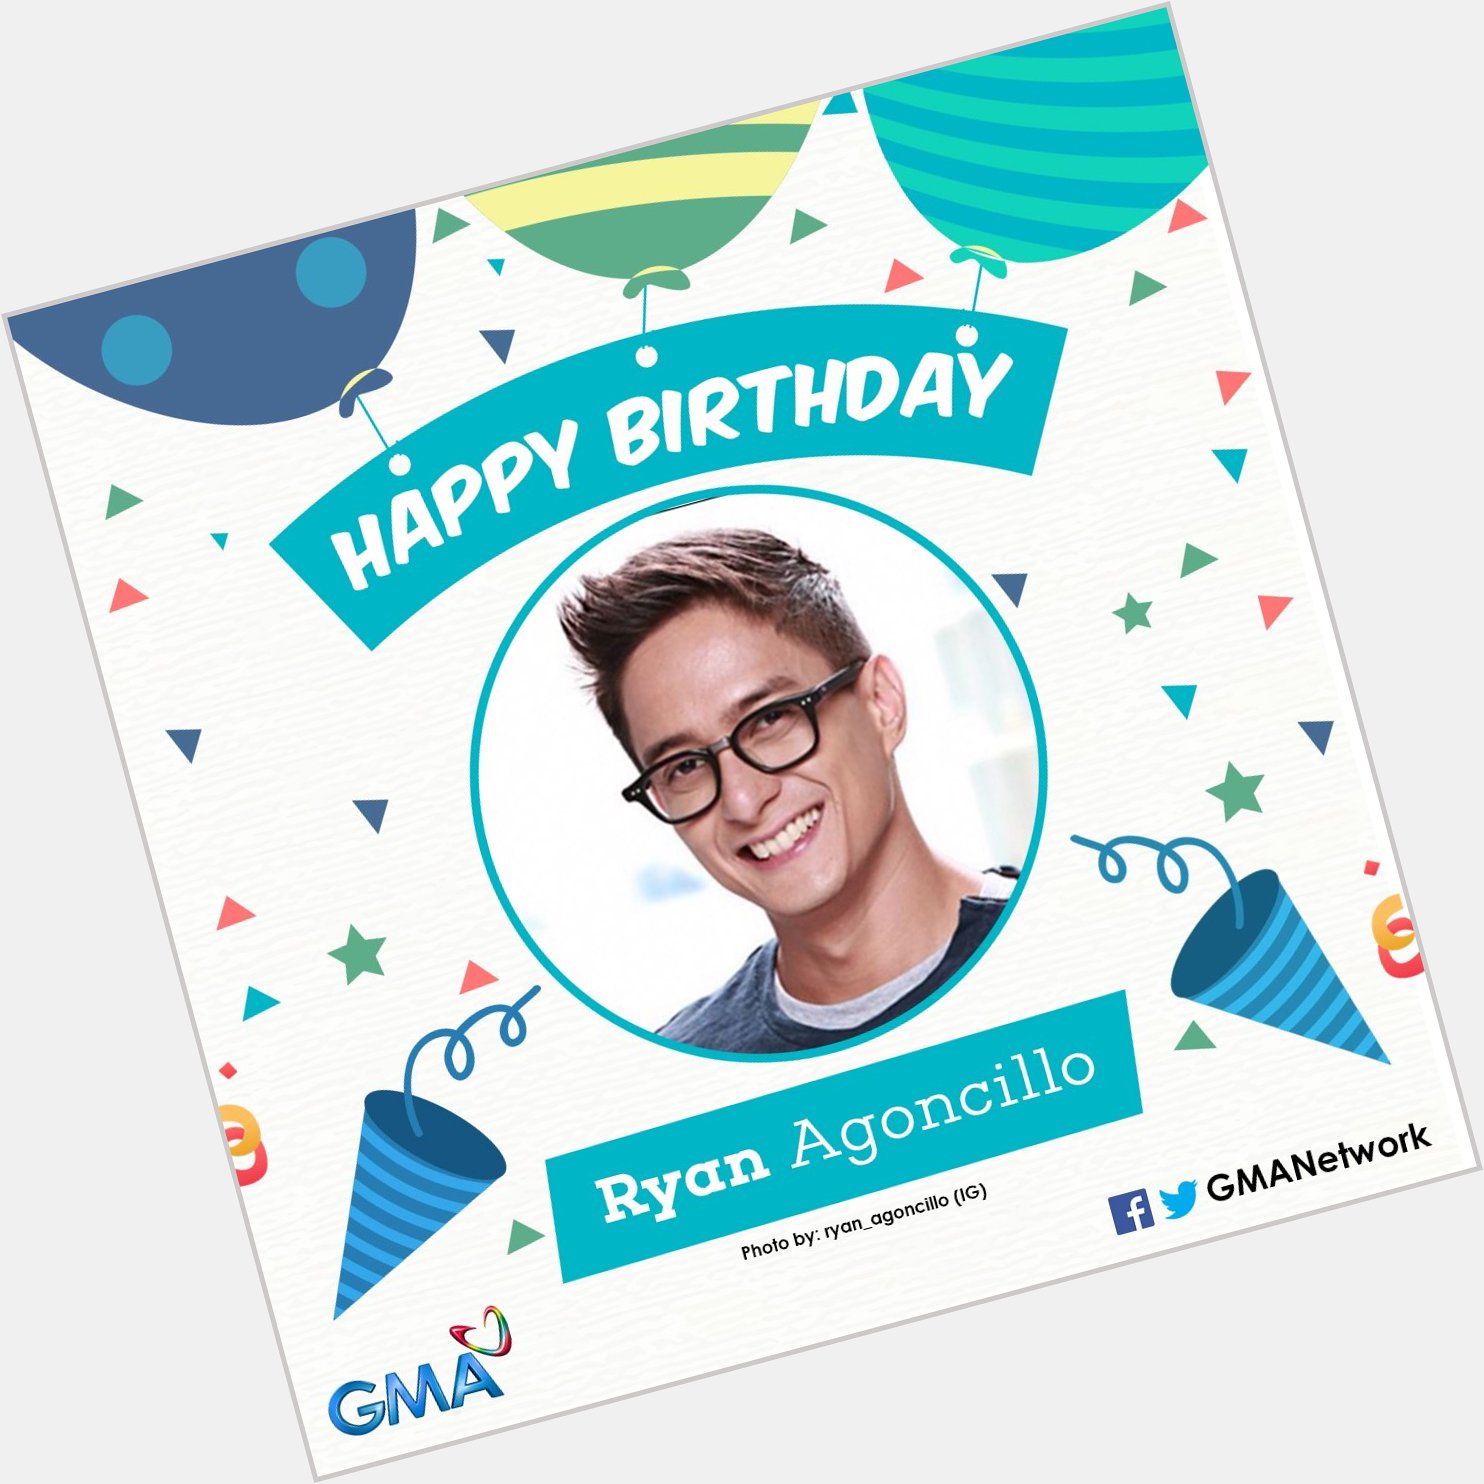 Belated happy birthday, Ryan Agoncillo! We hope you had a blast! 

What\s your wish for Ryan? :) 